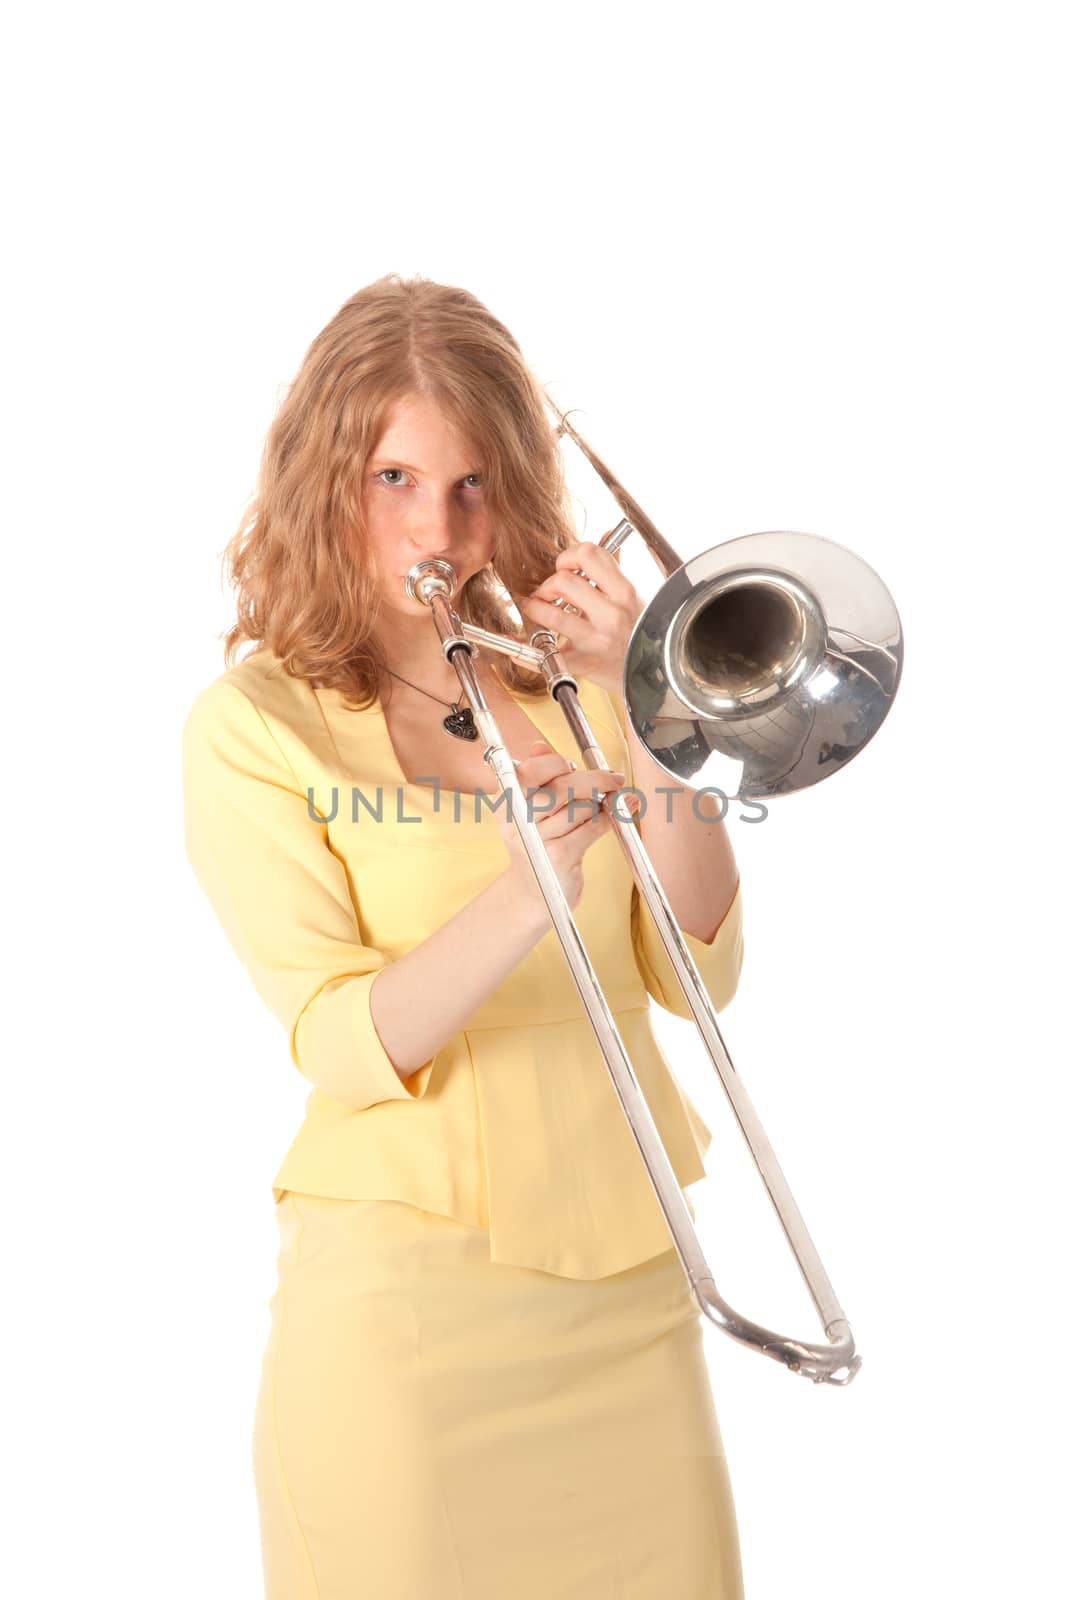 young woman in yellow playing trombone by ahavelaar